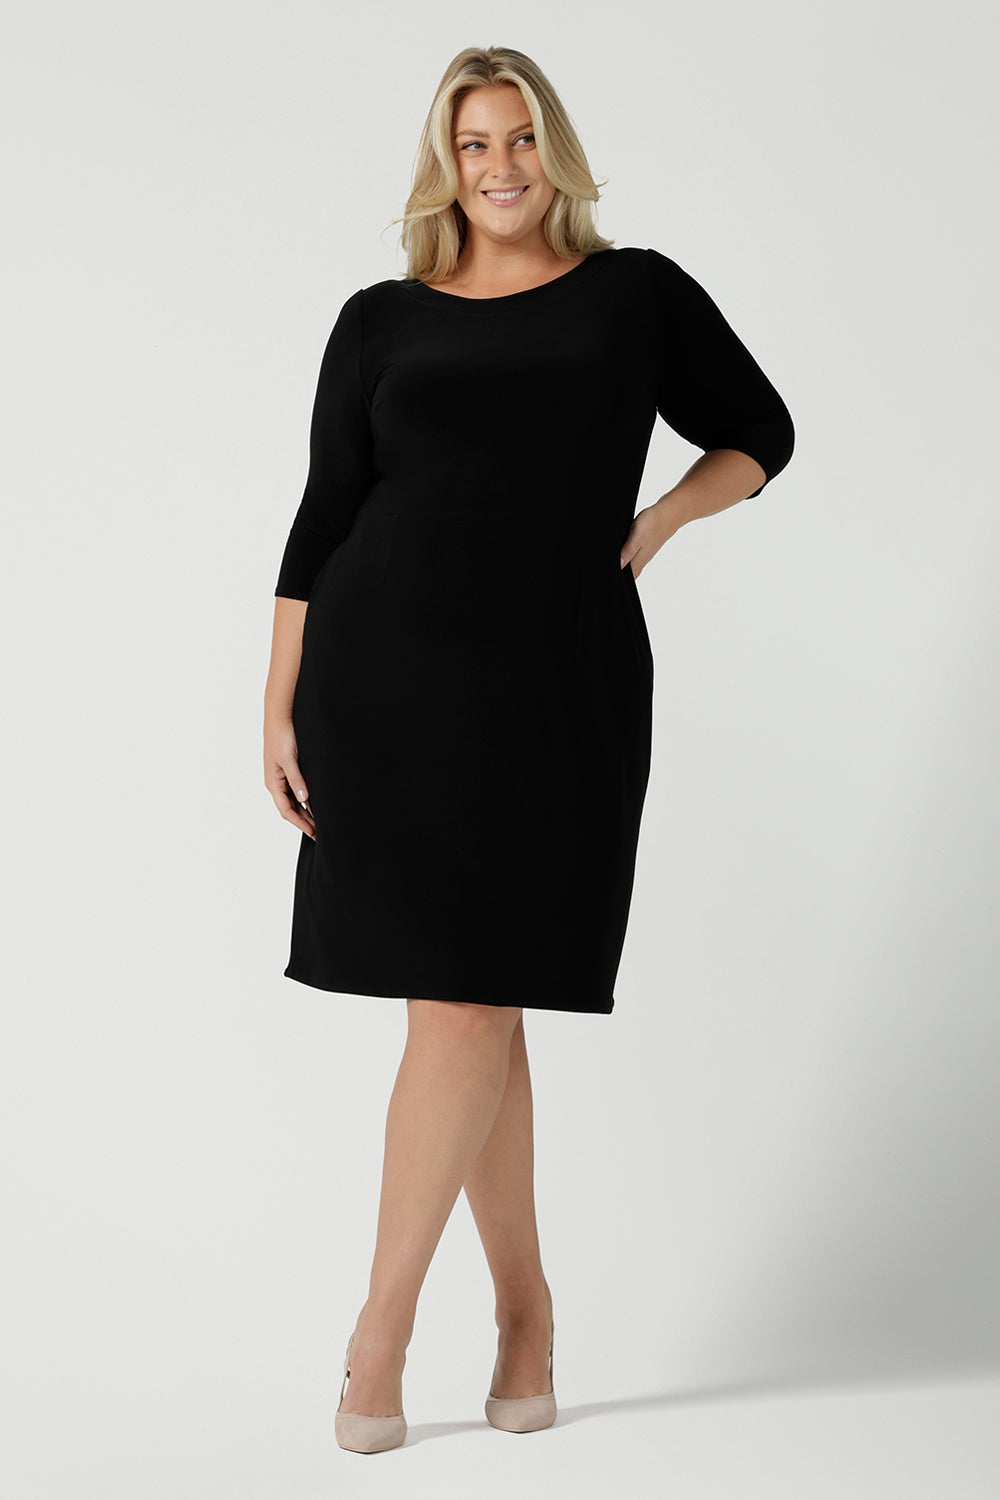 Size 18 woman wears the Audrey Dress, a black jersey round neckline dress with pockets and a boat neckline. Knee length style and easy care workwear for women. Made in Australia for women size 8 - 24. Styled back with a beige suede pump heel shoe. 